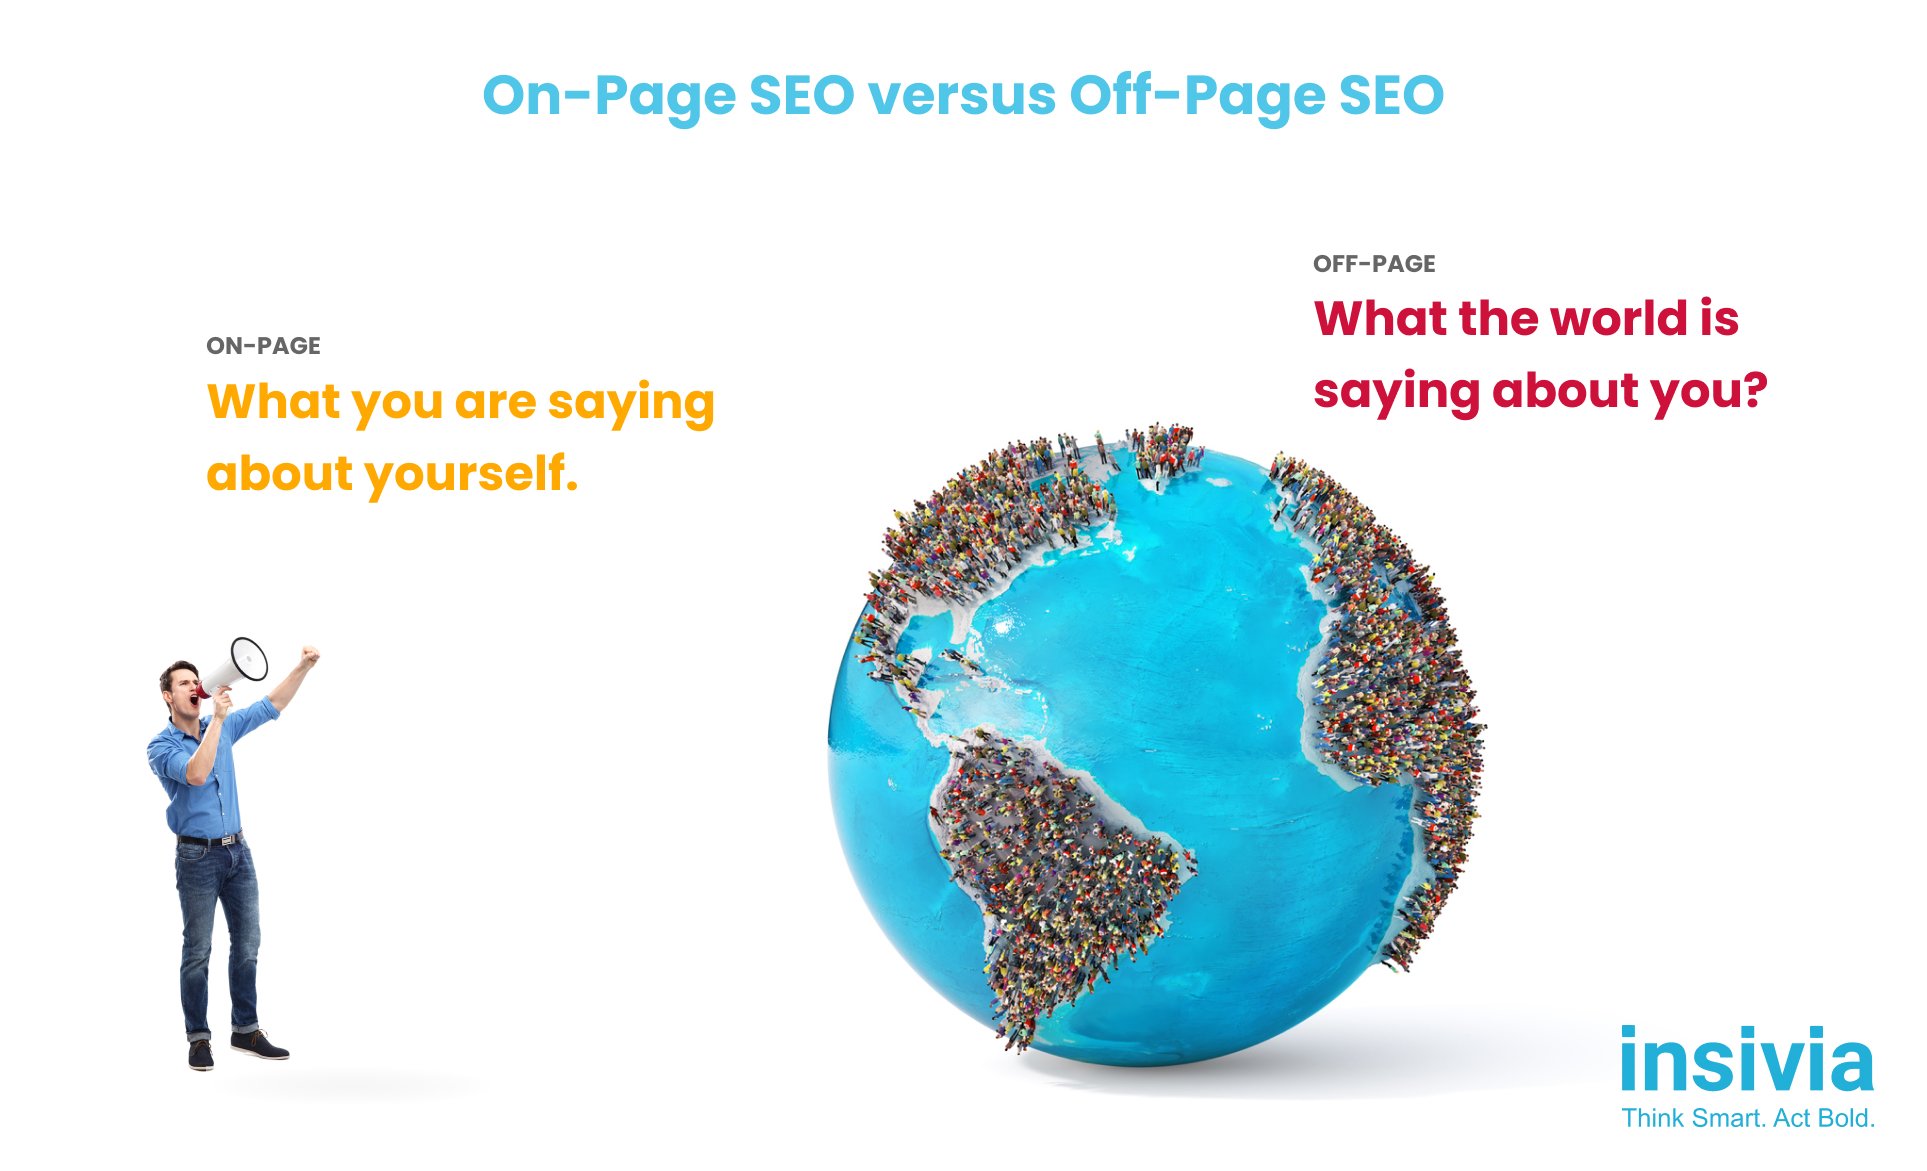 On-Page Versus Off-Page SEO